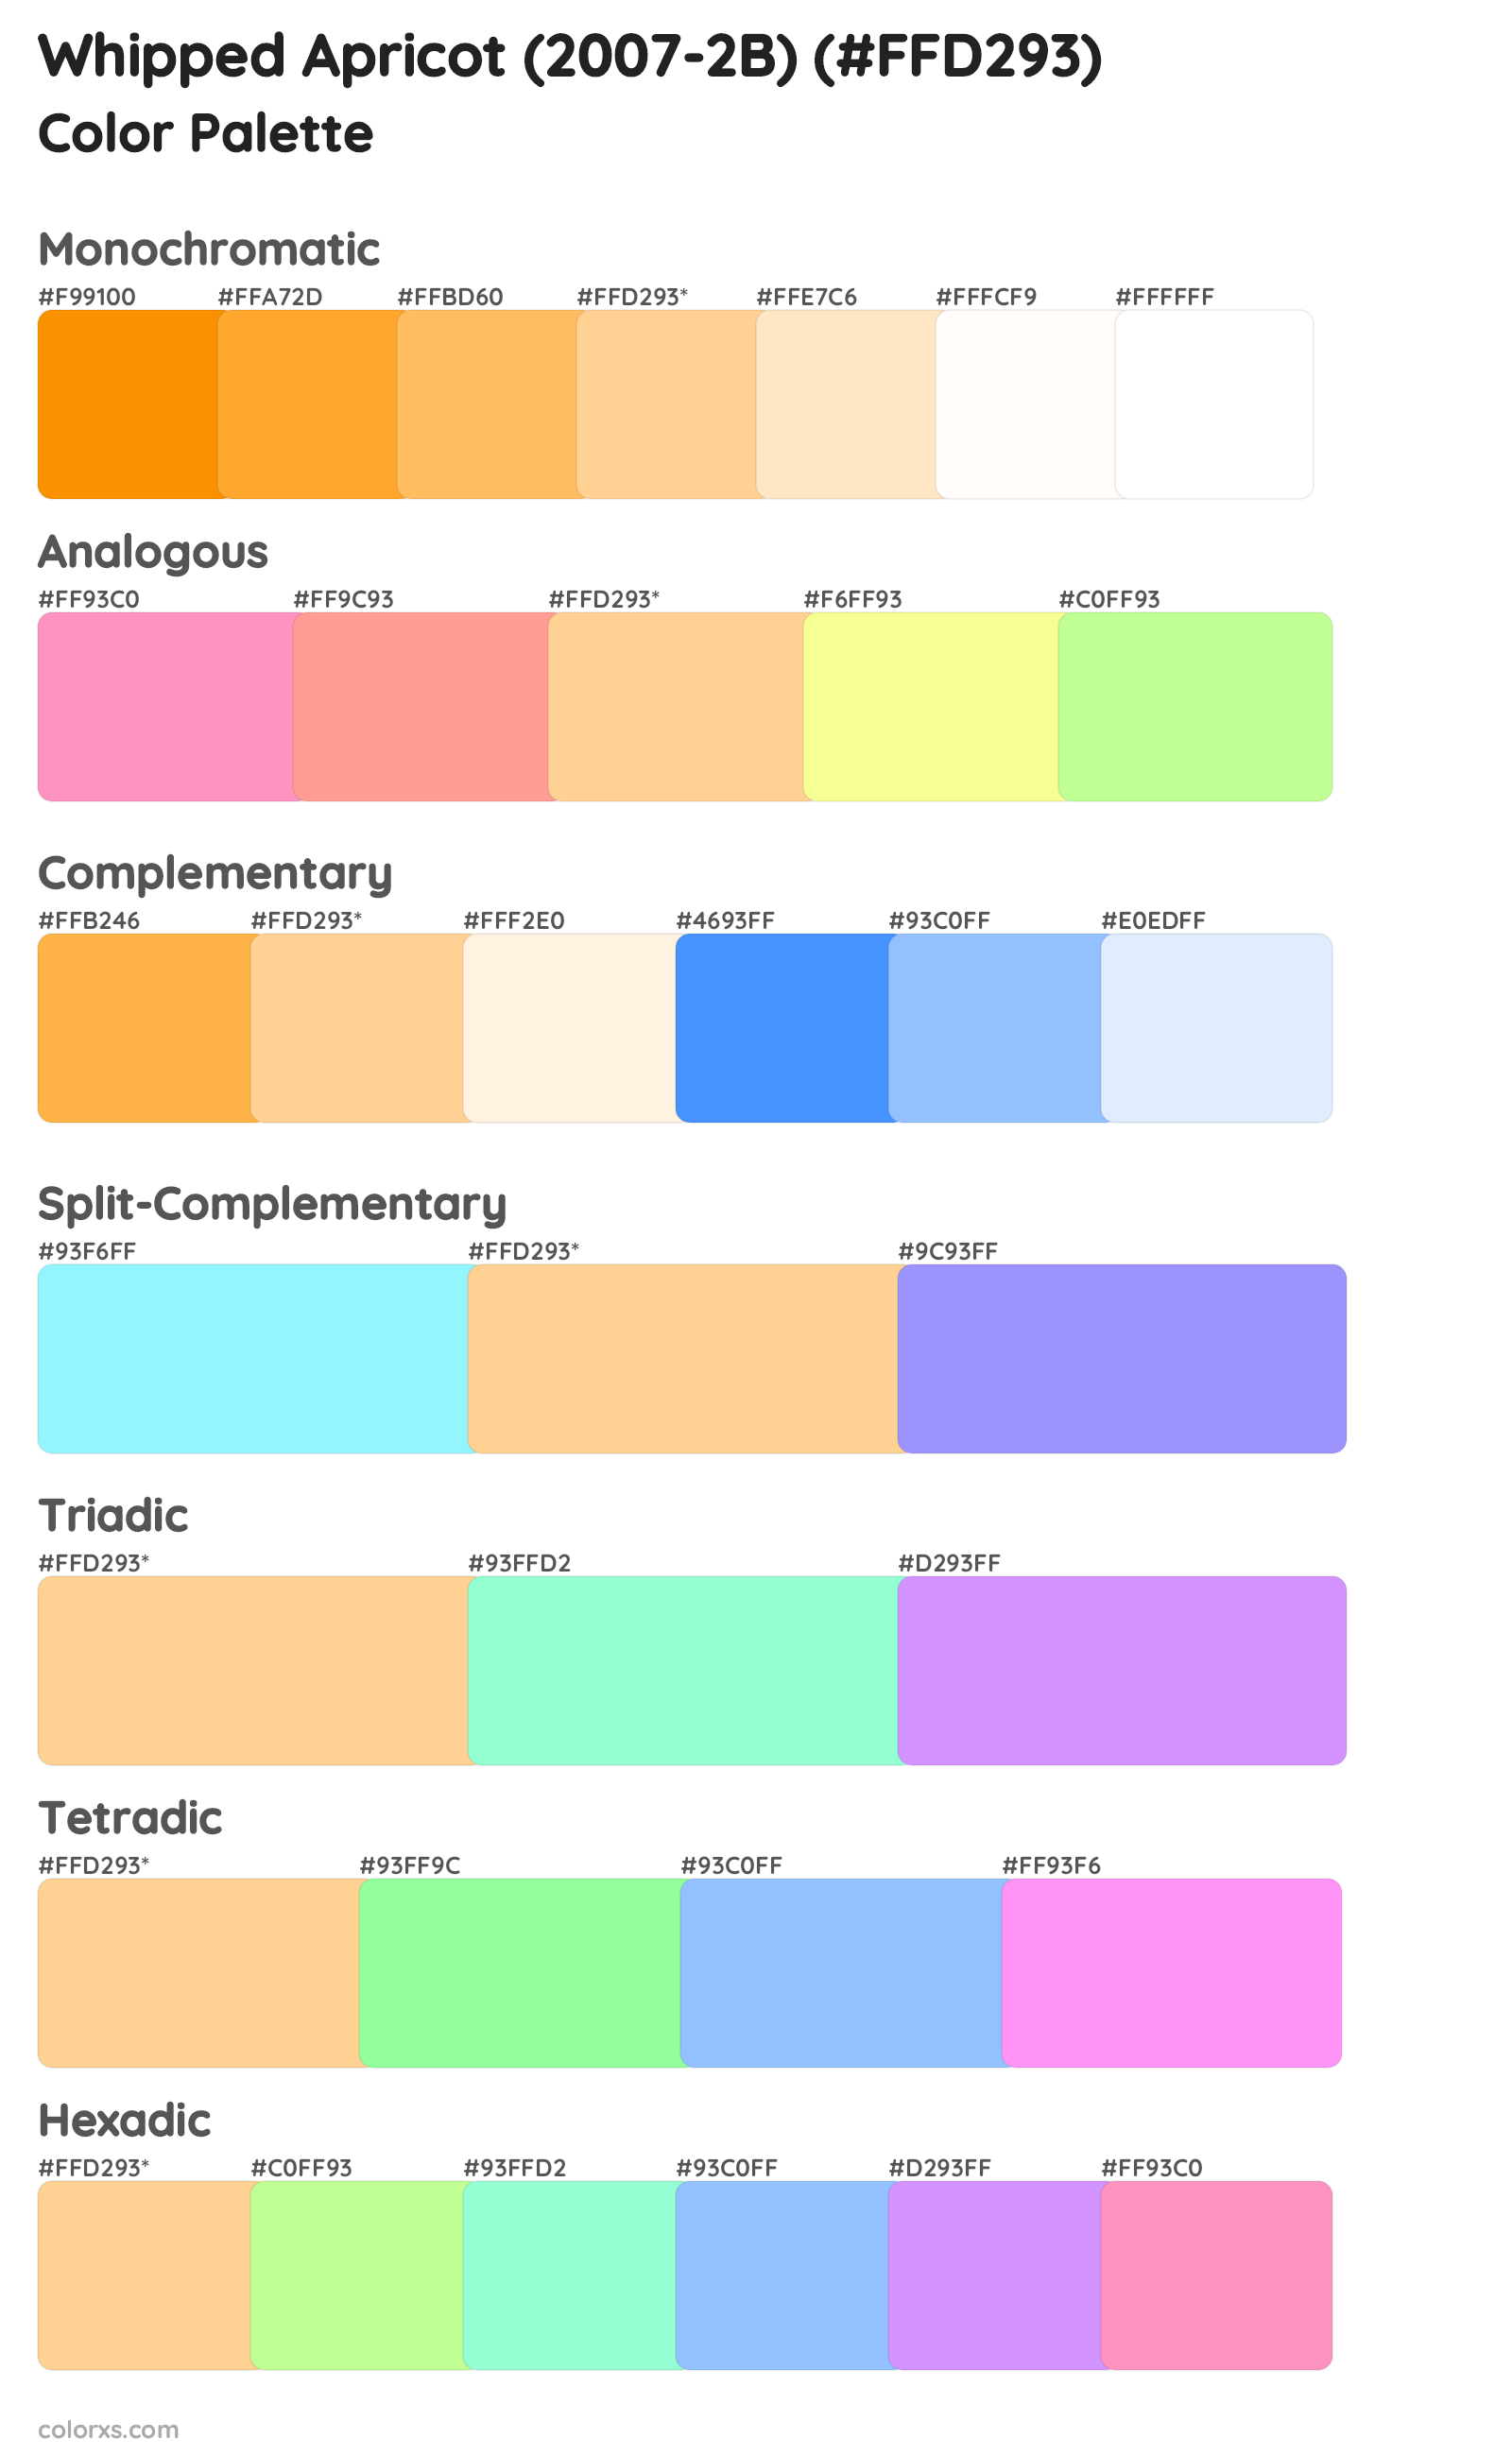 Whipped Apricot (2007-2B) Color Scheme Palettes